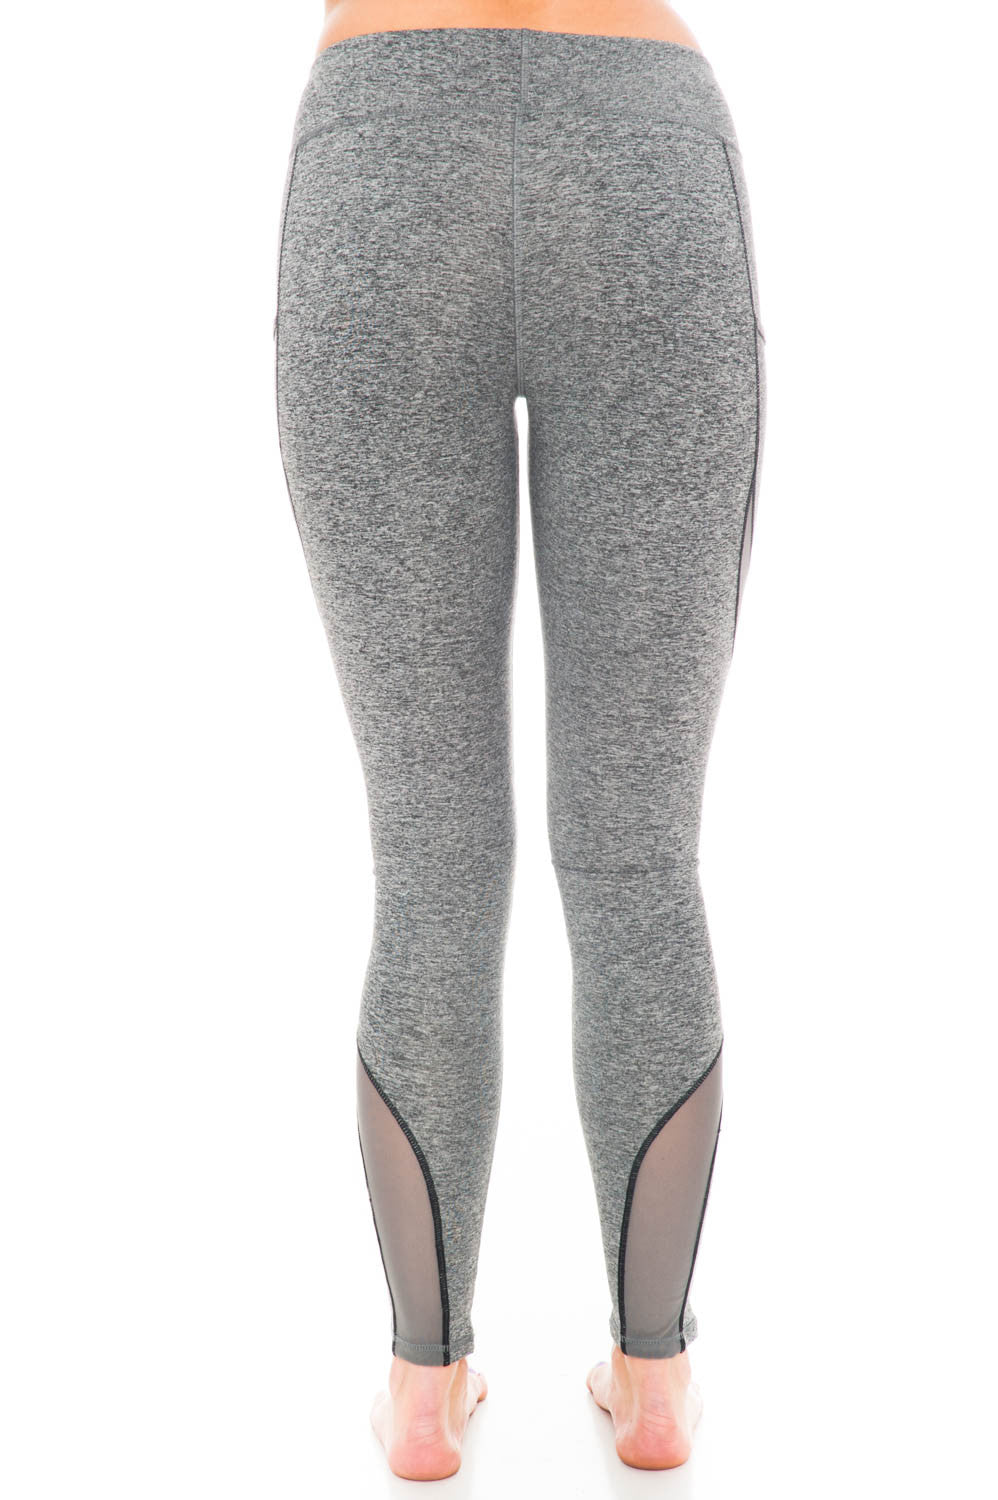 Legging - Mesh Detail Yoga Pant by Motion by Coalition